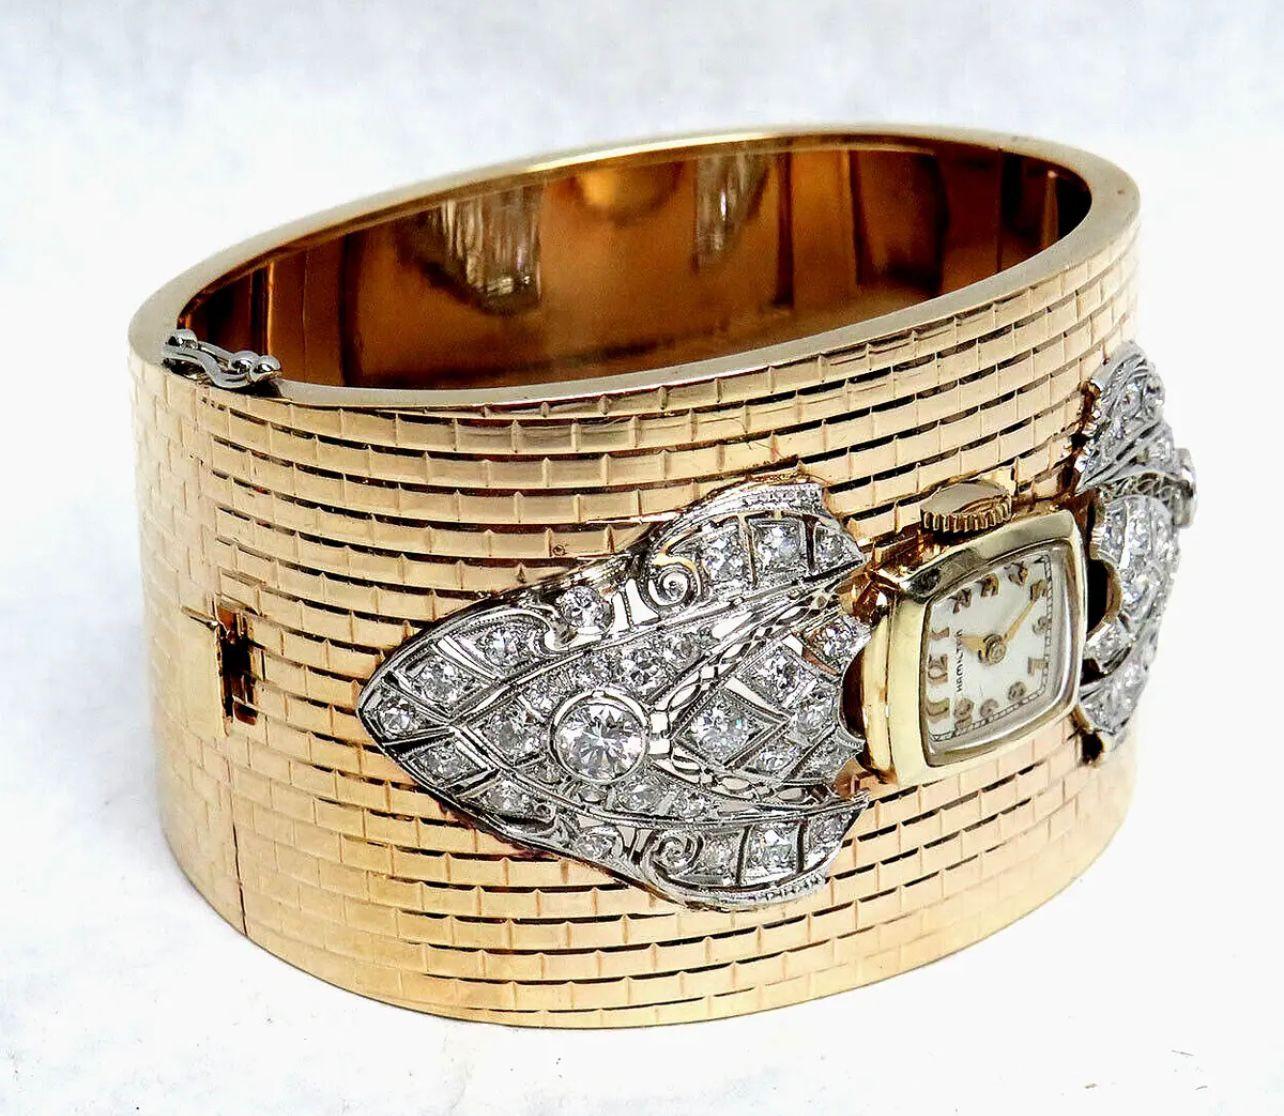 Vintage Hamilton watch embedded in cuff bracelet made of 14k gold and decorated with diamonds.
Period: 1950s
Measurements: 
length: 15 cm
width: 4 cm
Condition: very good. 

........Additional information ........

- Photo might be slightly